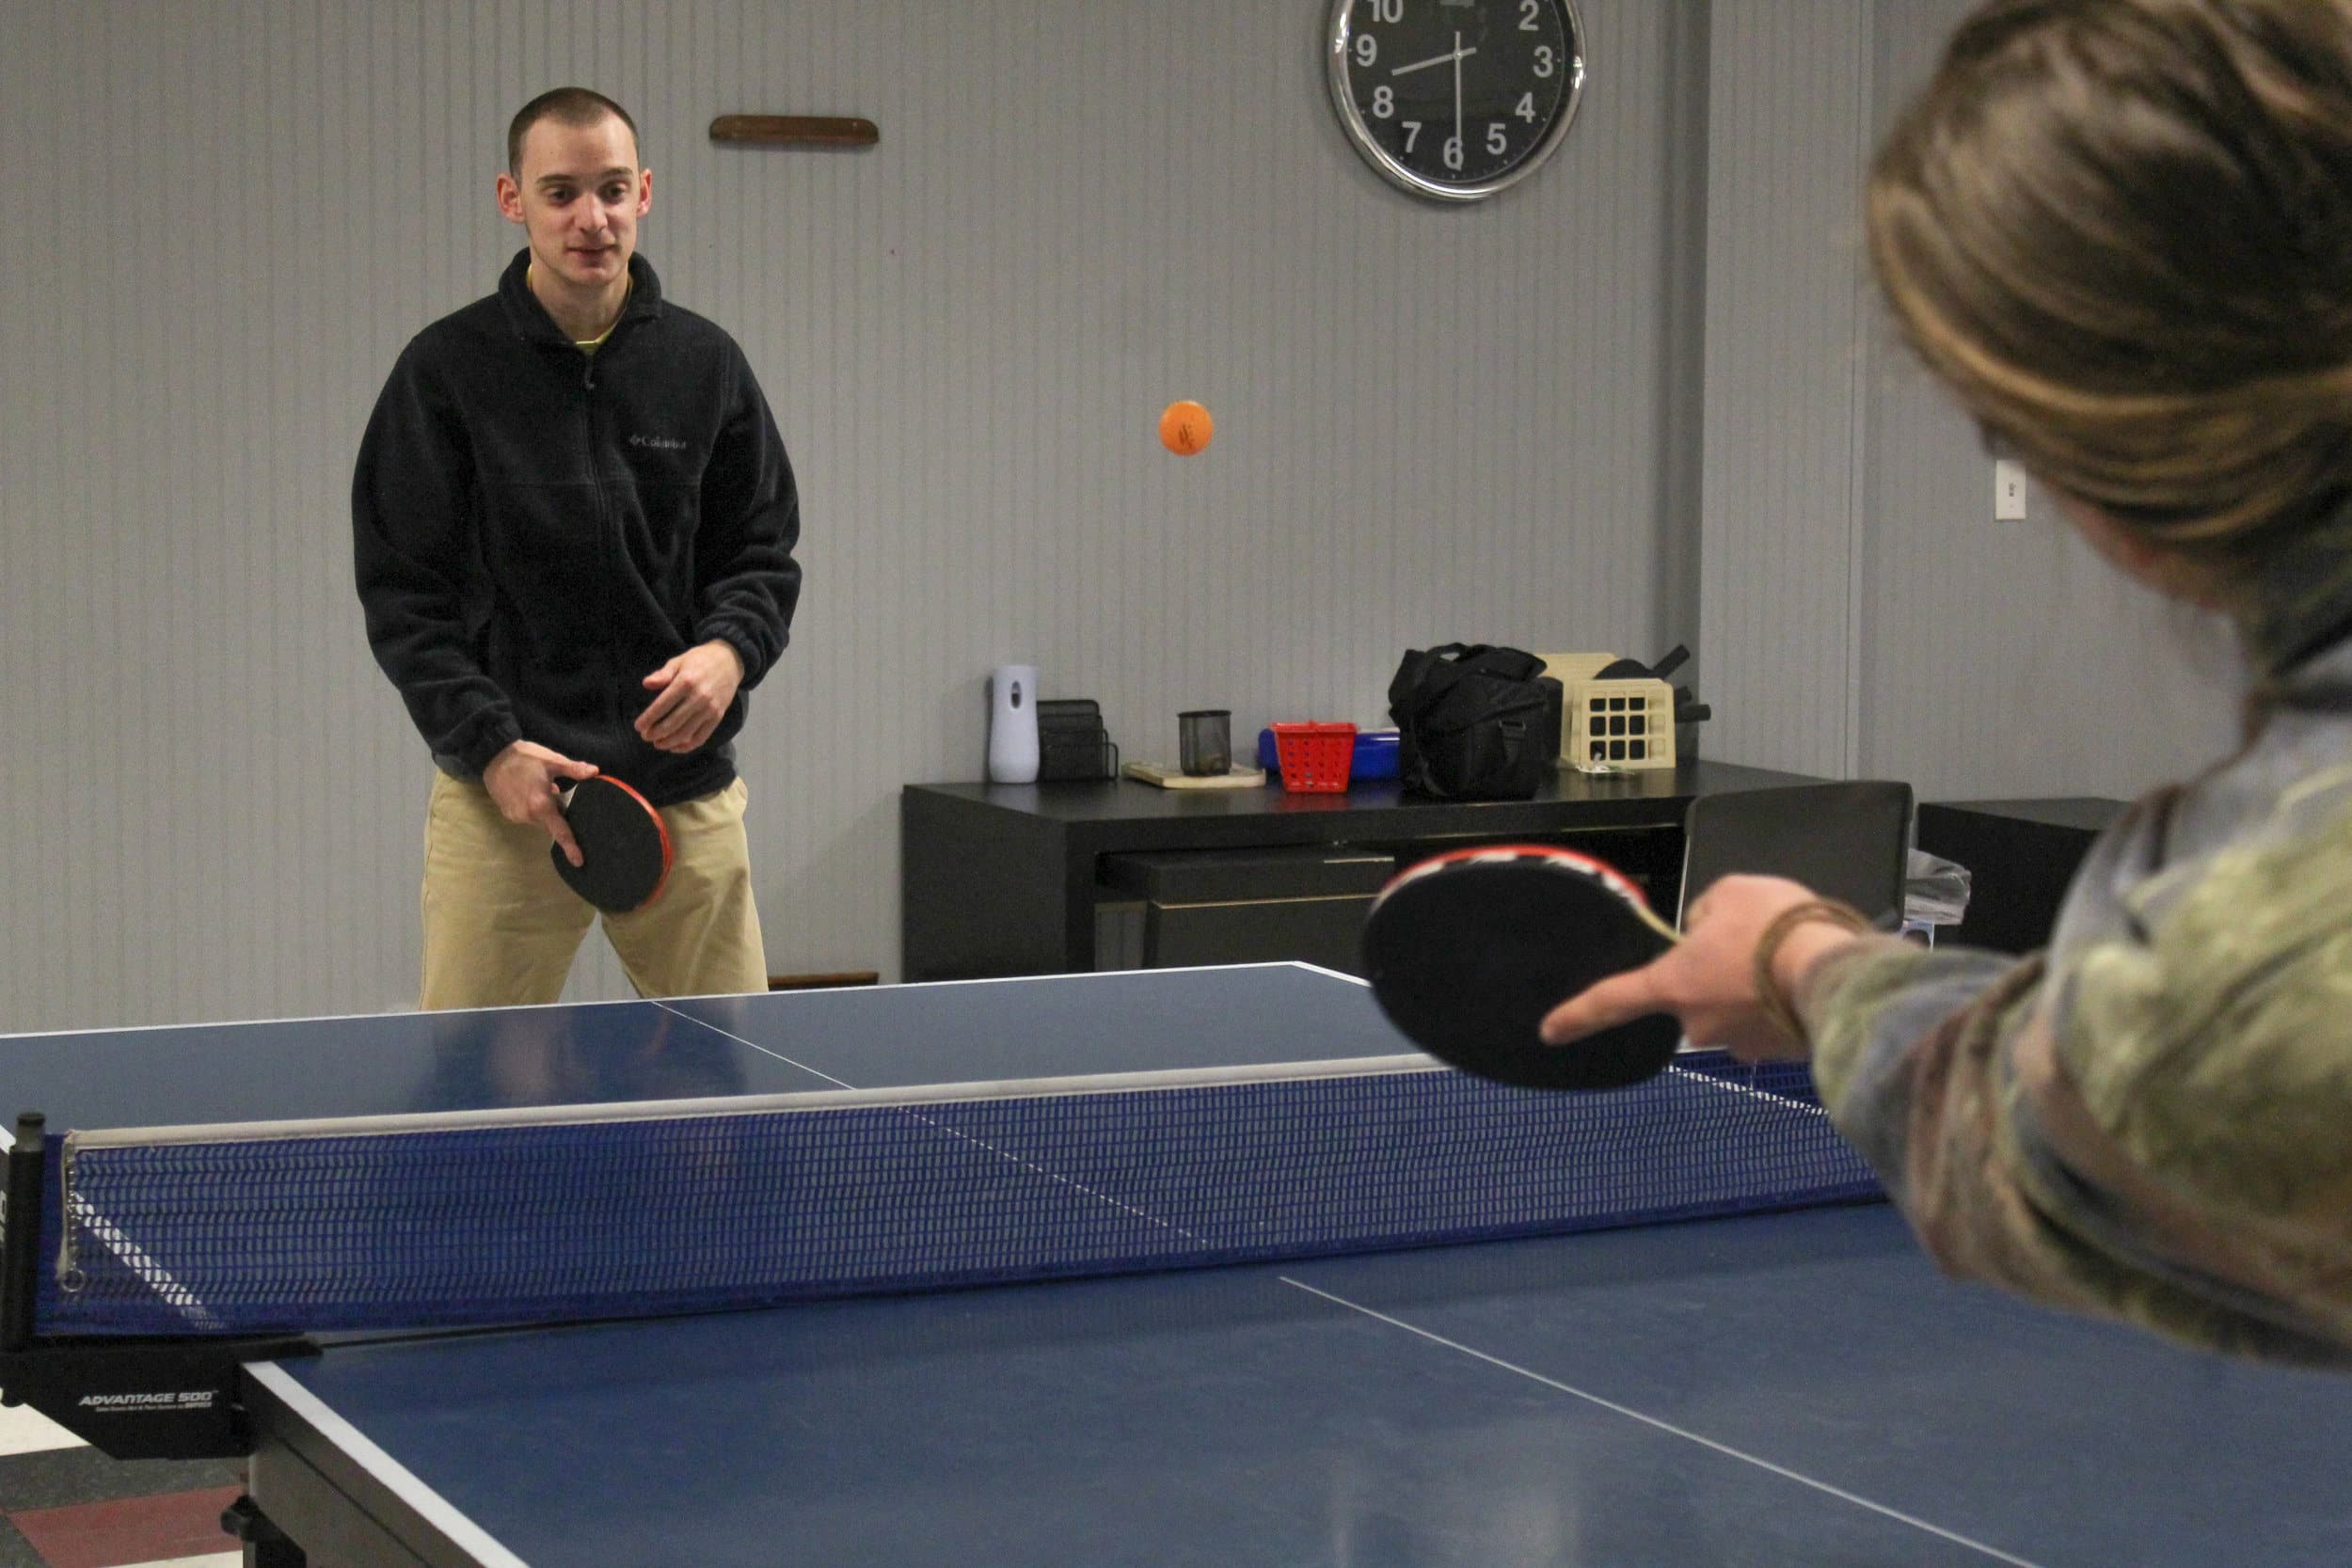 Junior Josh and freshmen Jacob battle at a game of ping-pong.